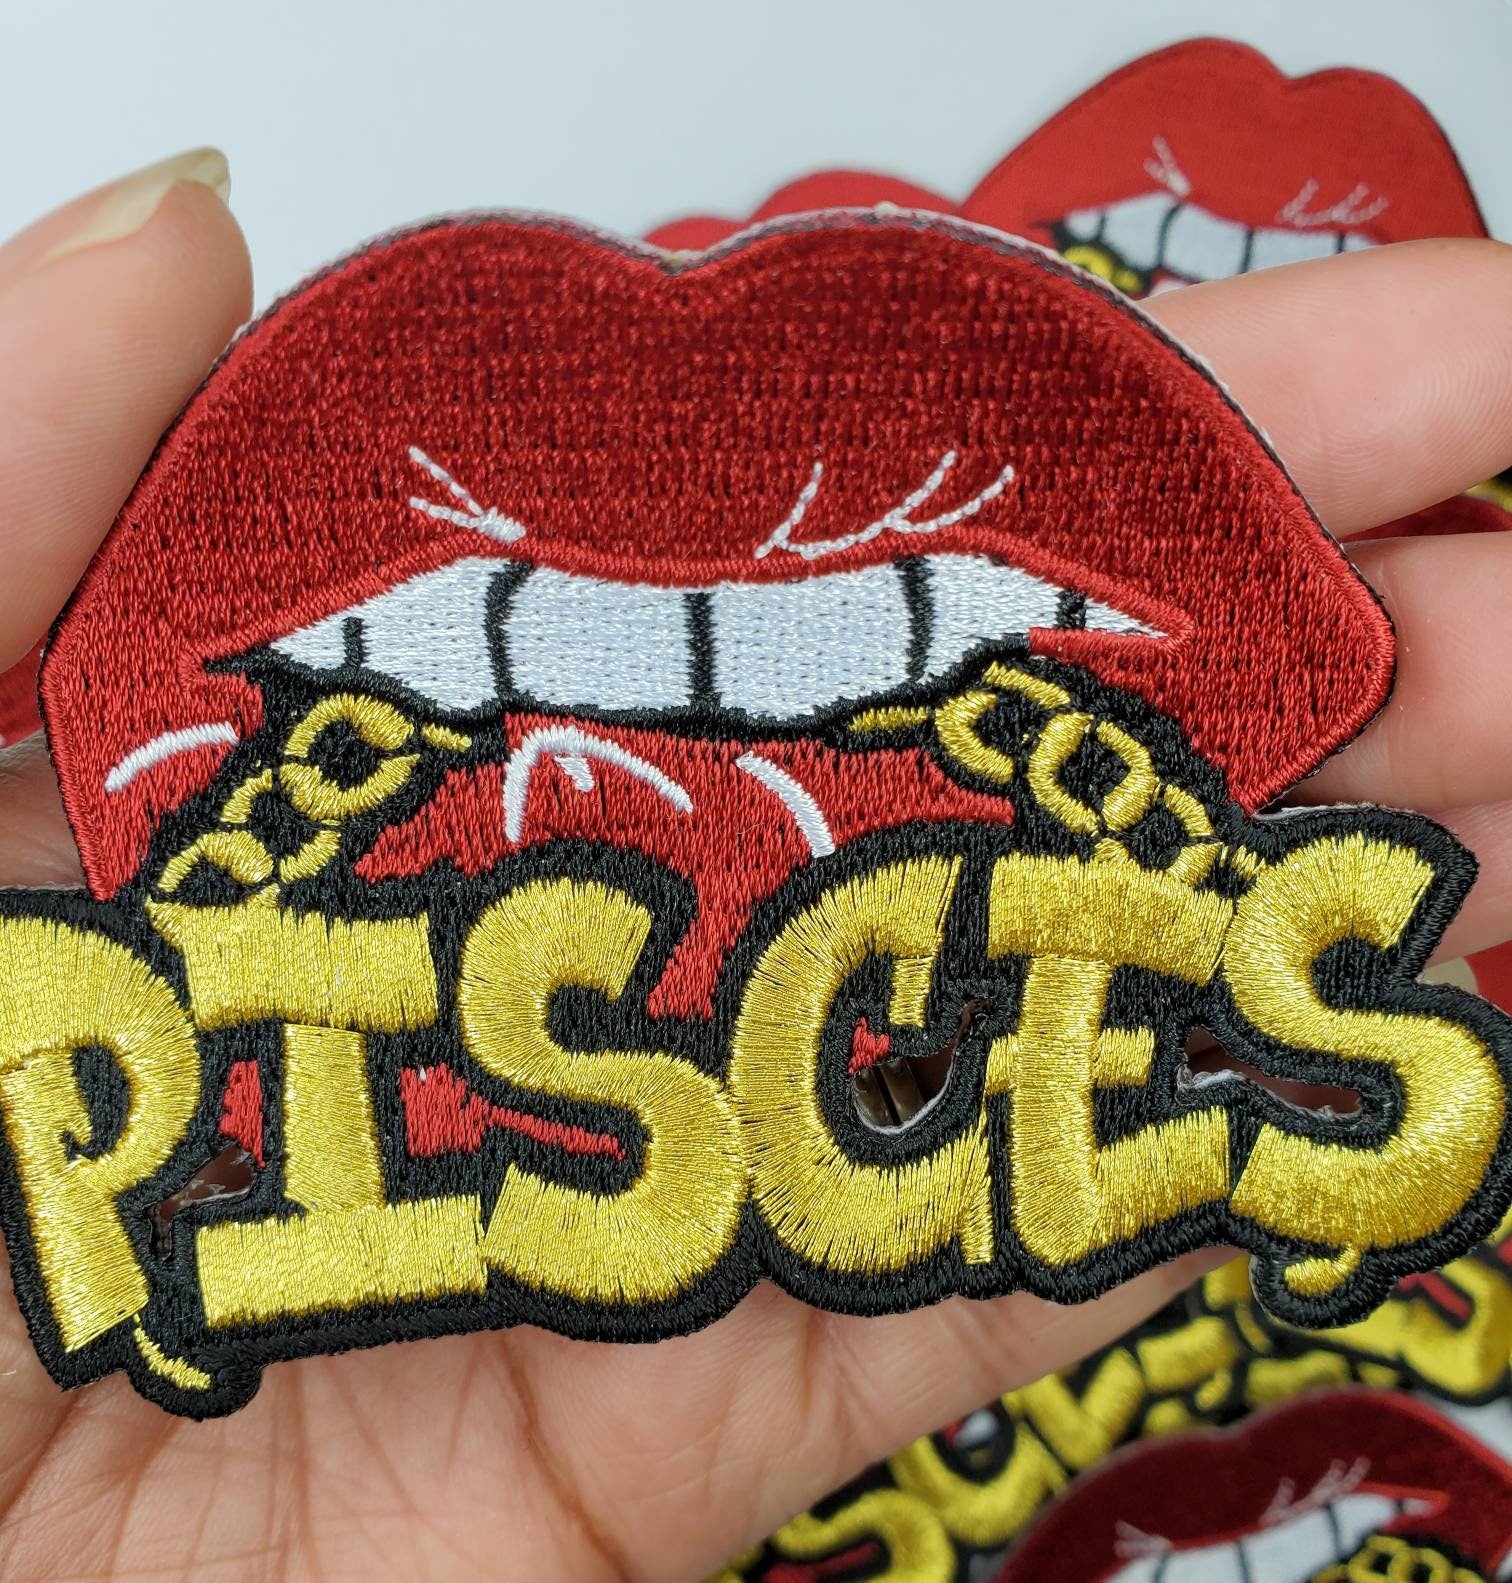 Poppin' Red Lip "Pisces" w/Gold Metallic Chain|Iron-On Patch|Astrology Applique|Cool Embroidered Patch|DIY Patch for Denim & Accessories